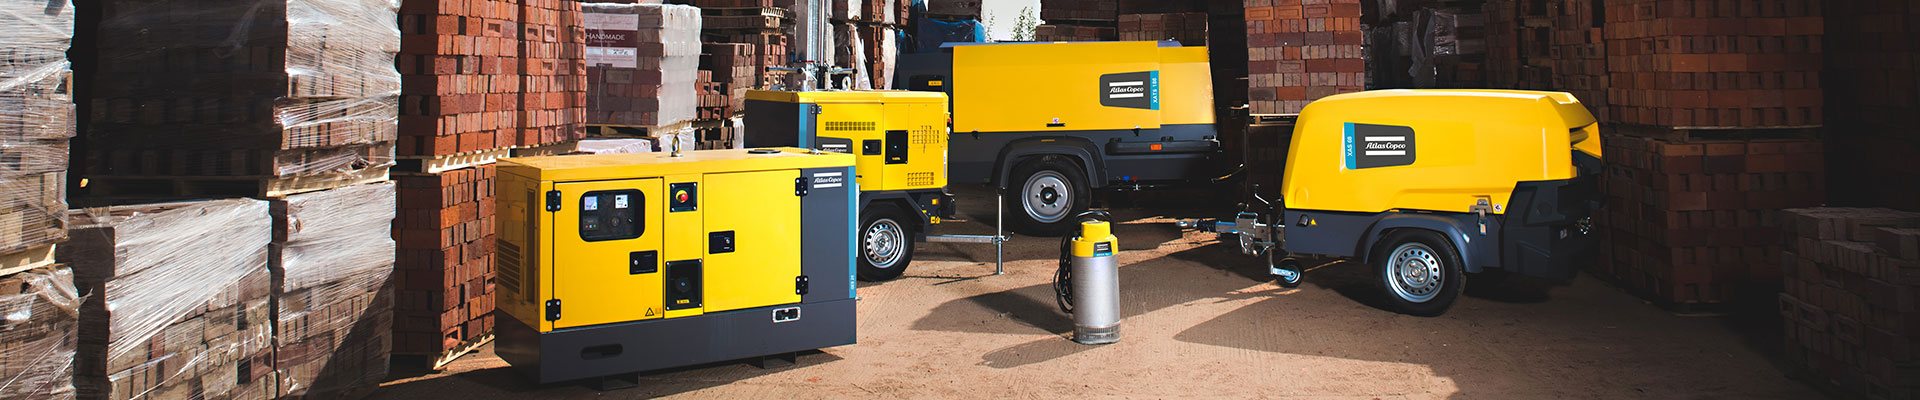 Atlas Copco equipment used on a construction site